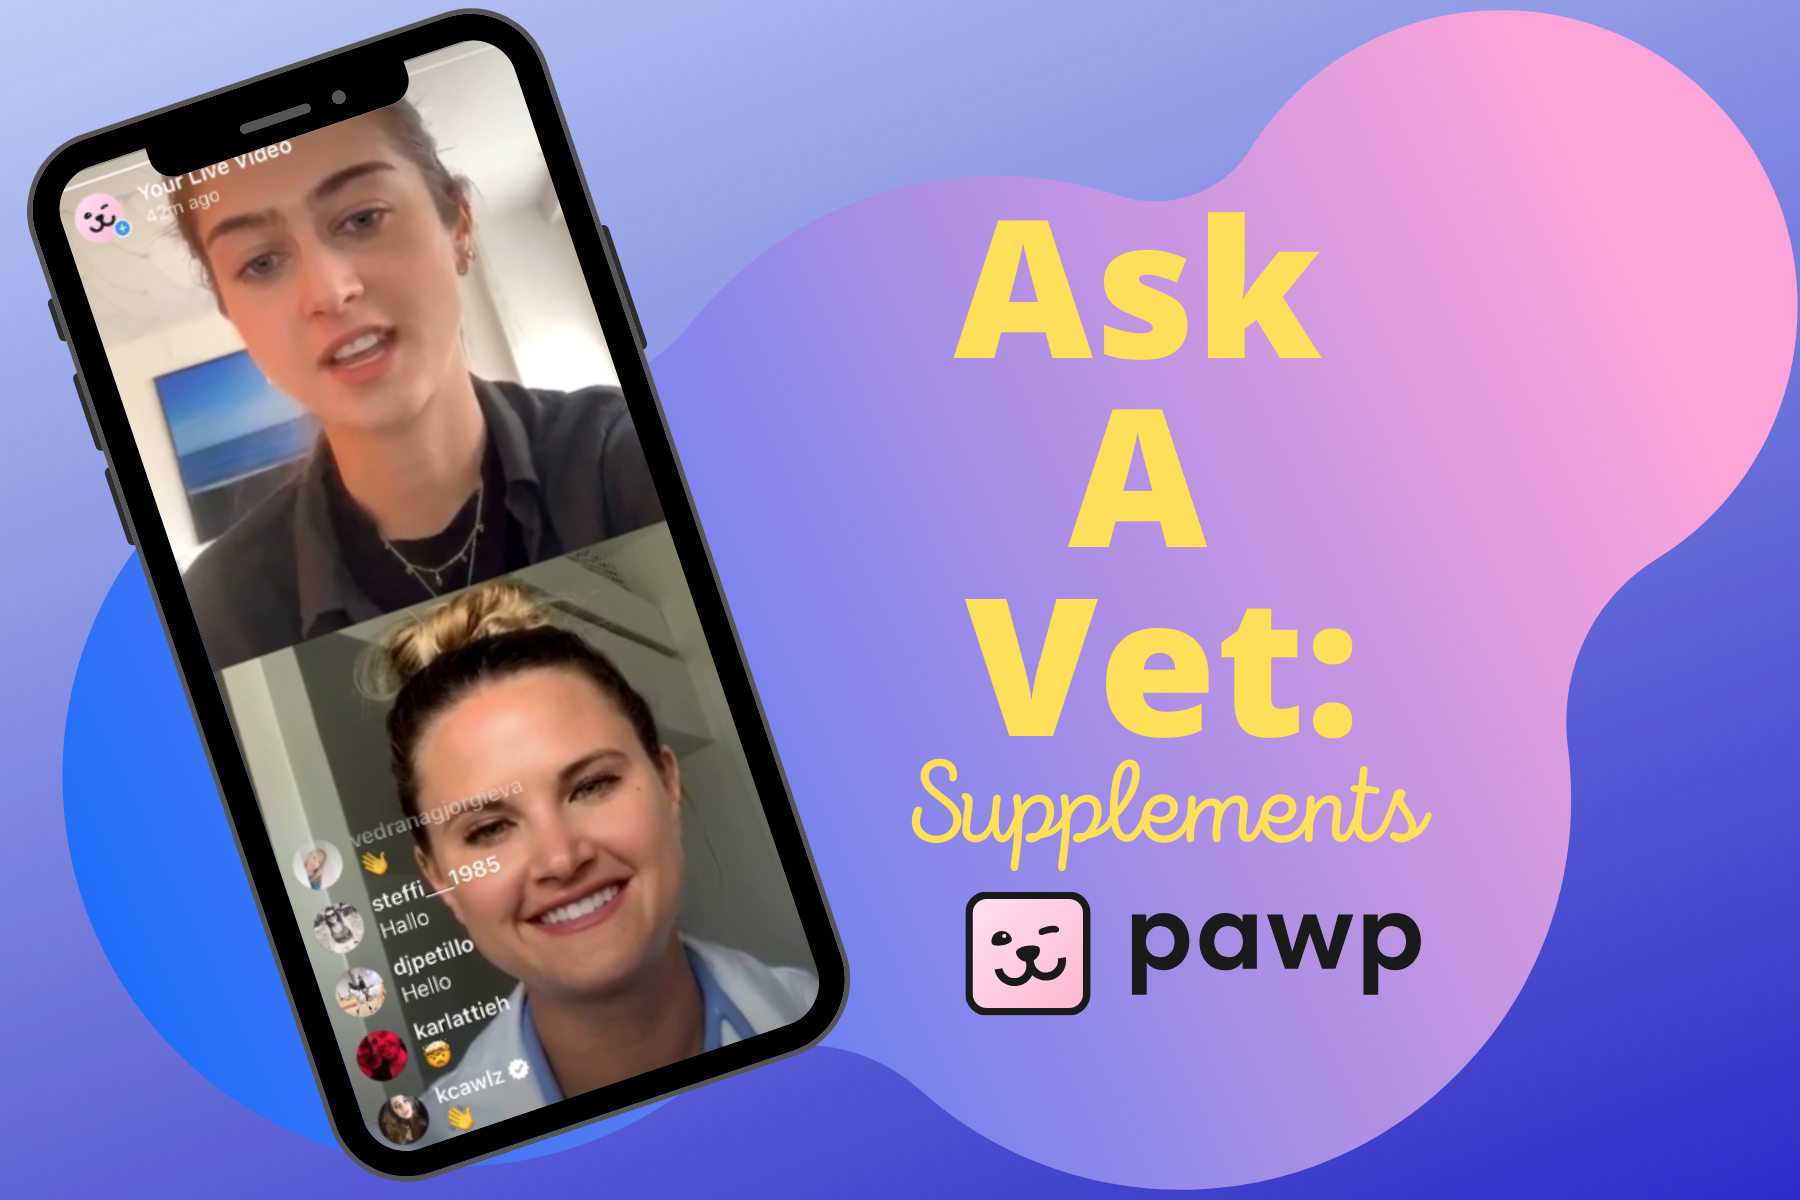 We Asked A Vet About Dog Supplements, Joint Pain, Skin Issues & More